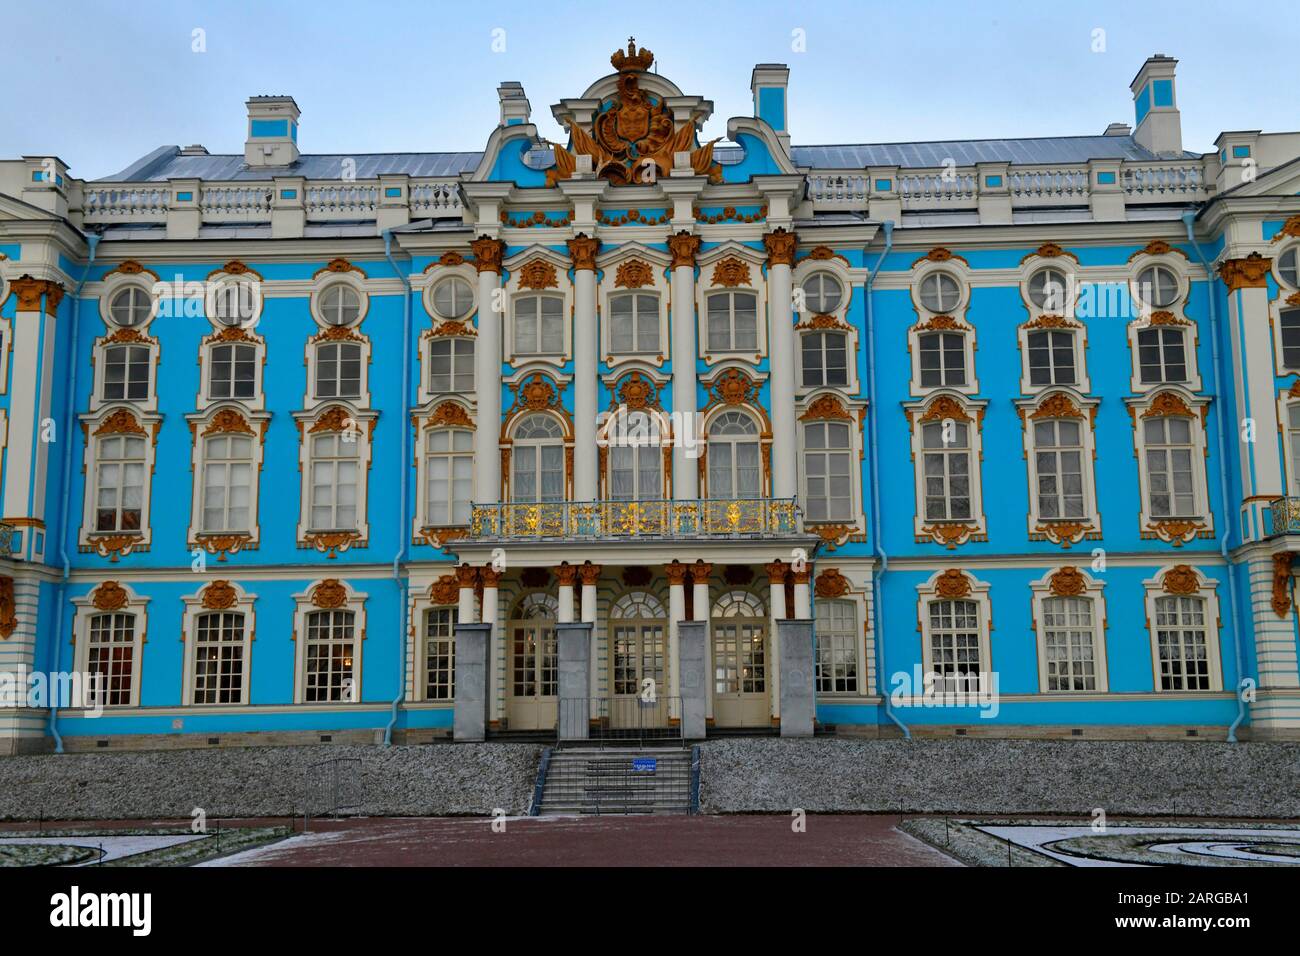 Caterine's Palace in Puschkin in St. Petersburg, Russland. Stockfoto